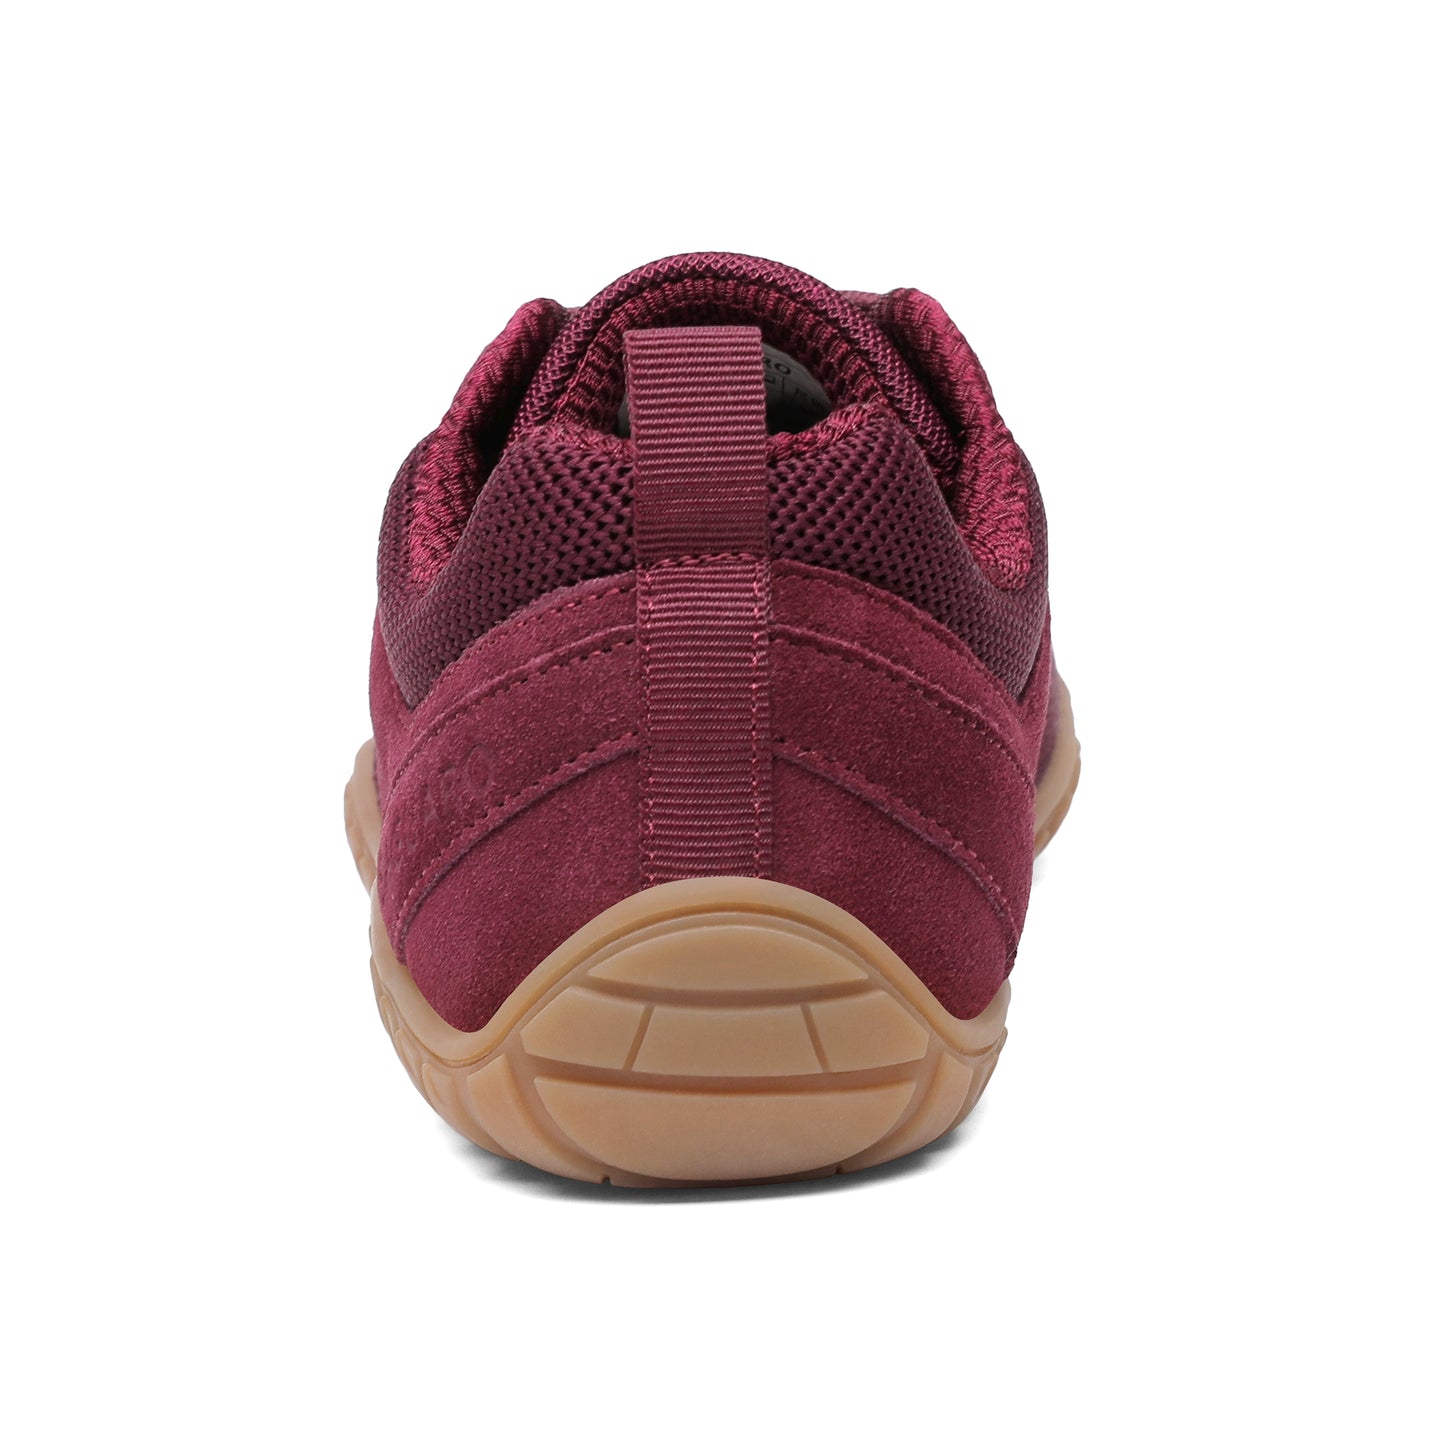 Wish I - Rojo - Casual Barefoot shoes